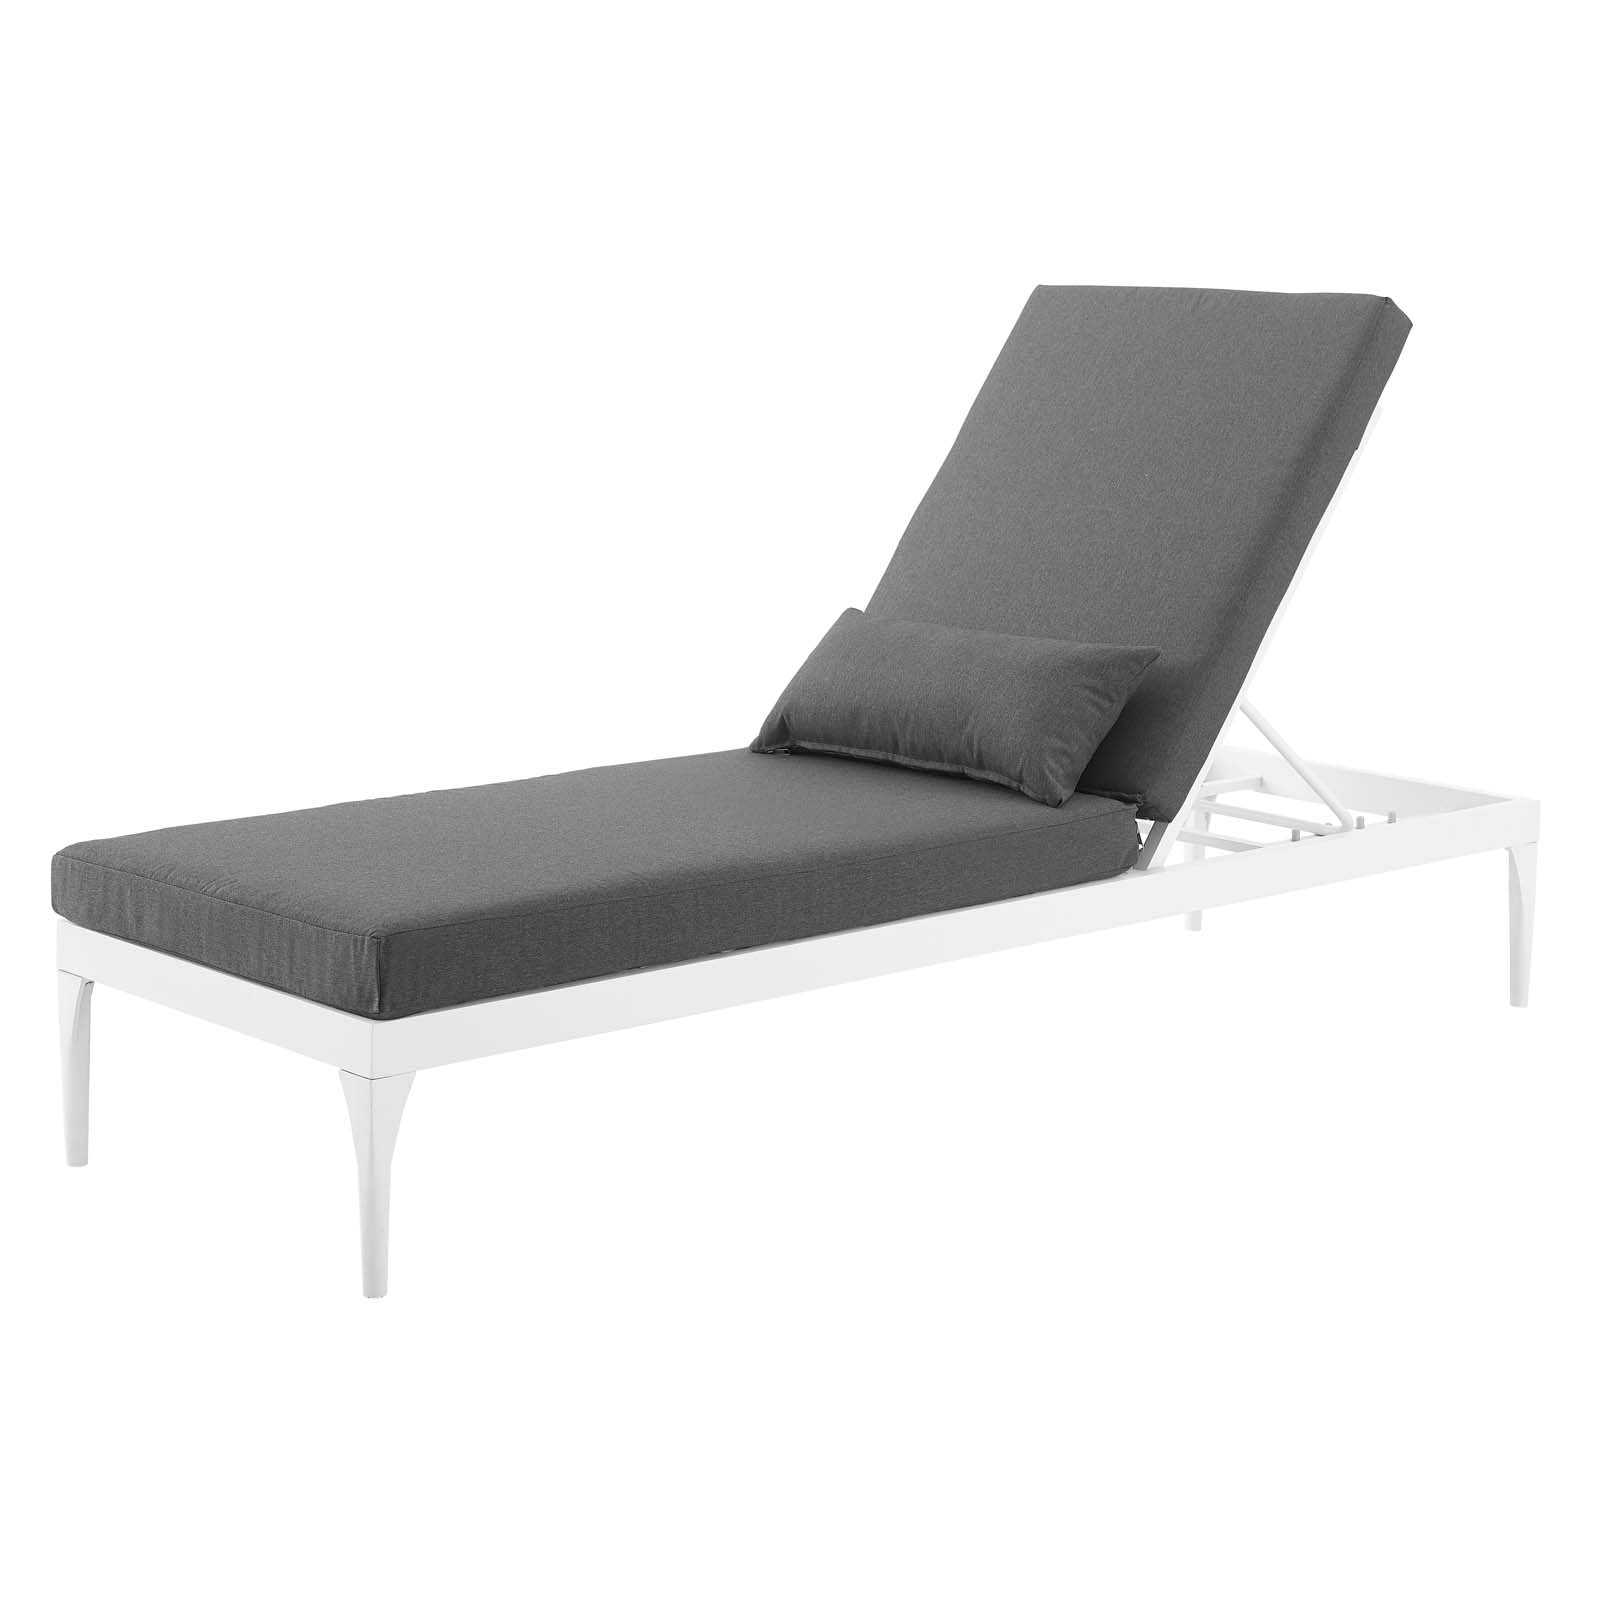 Modern Contemporary Urban Design Outdoor Patio Balcony Garden Furniture Lounge Chair Chaise, Fabric Metal Steel, White Grey Gray - image 1 of 7